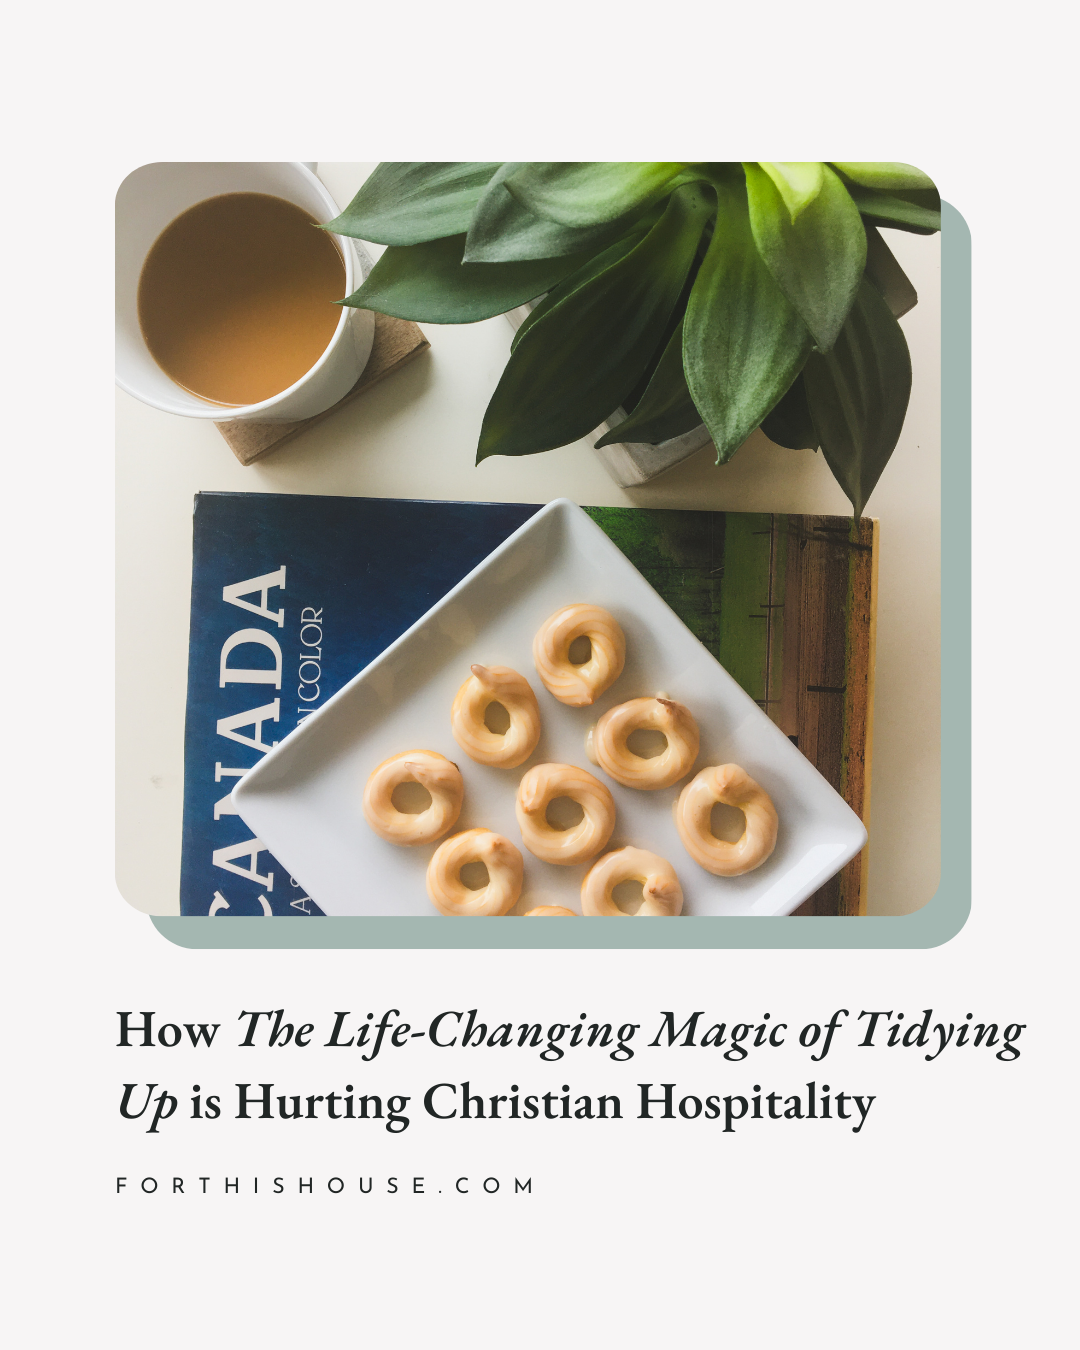 How The Life-Changing Magic of Tidying Up is Hurting Christian Hospitality